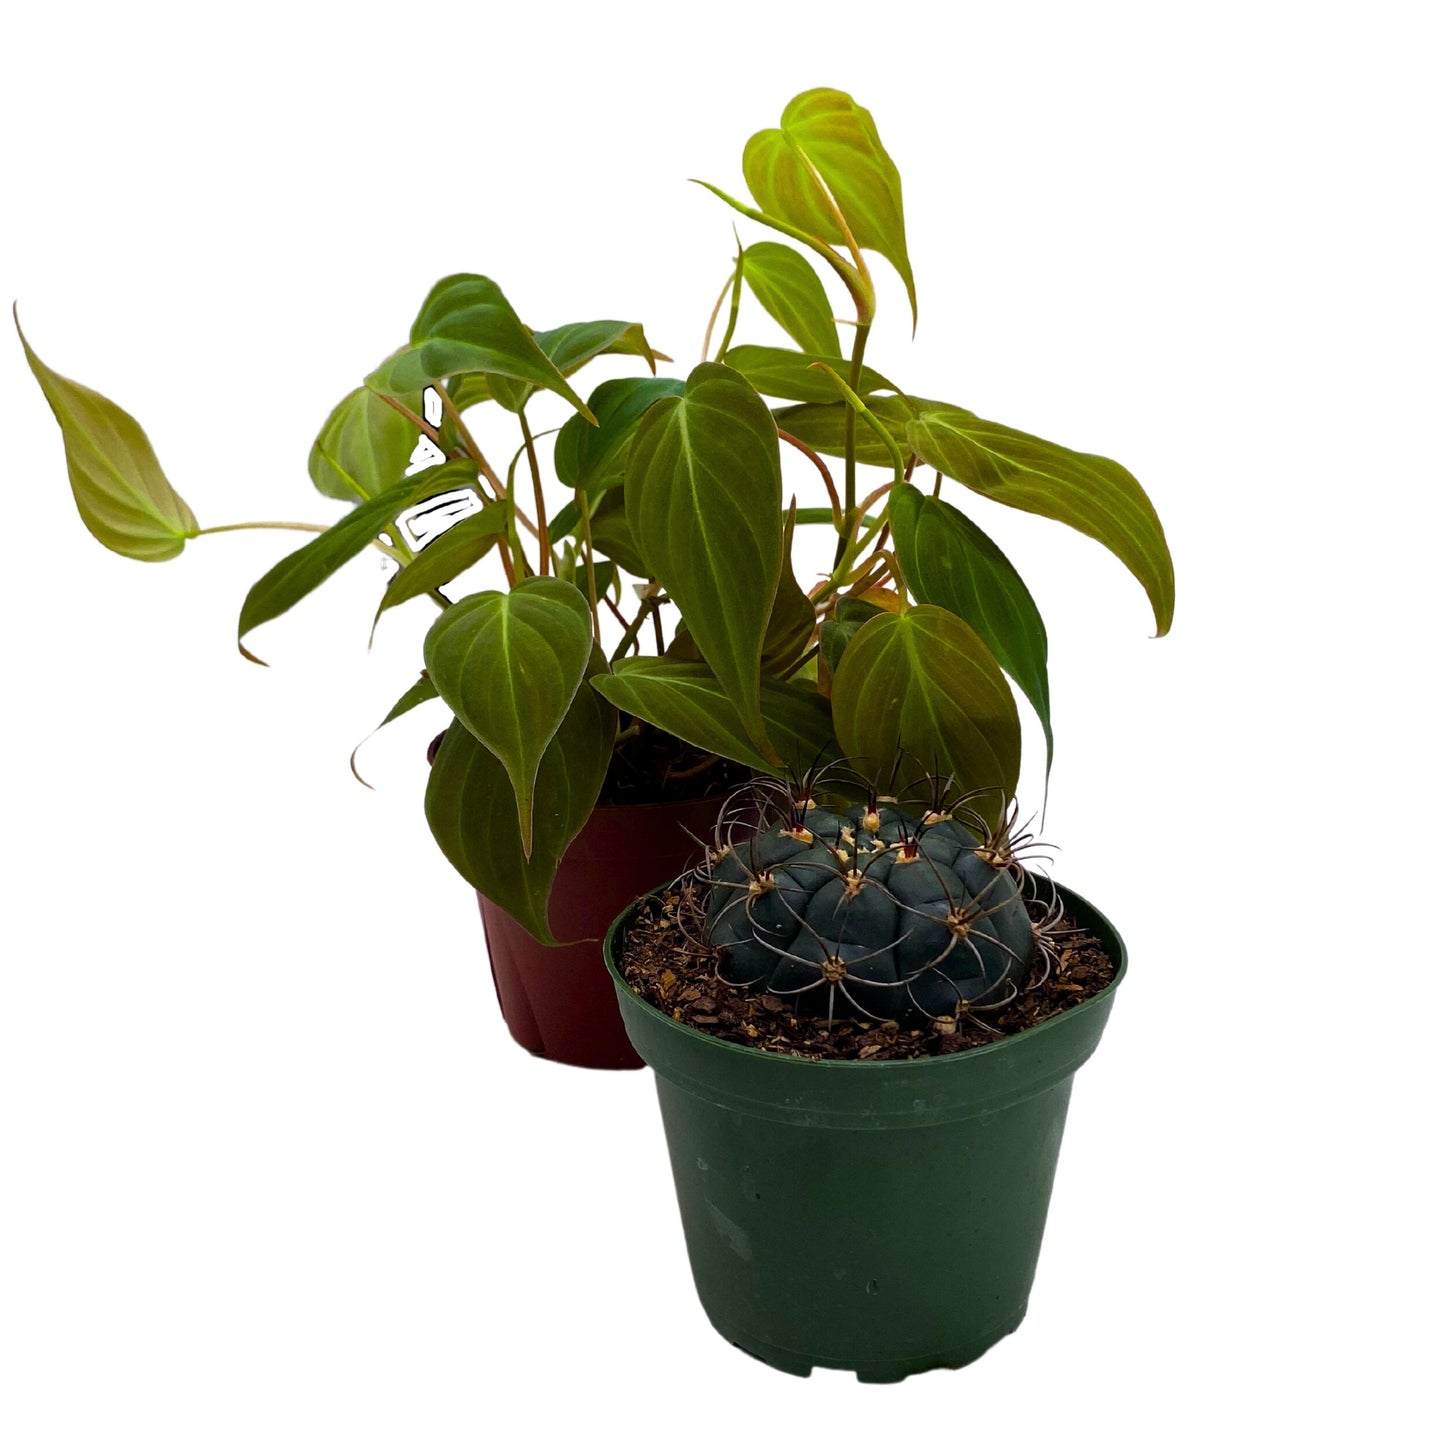 Plant Mystery Box, 4 inch pots, set of 2, Monthly Subscription, Always Different Houseplants